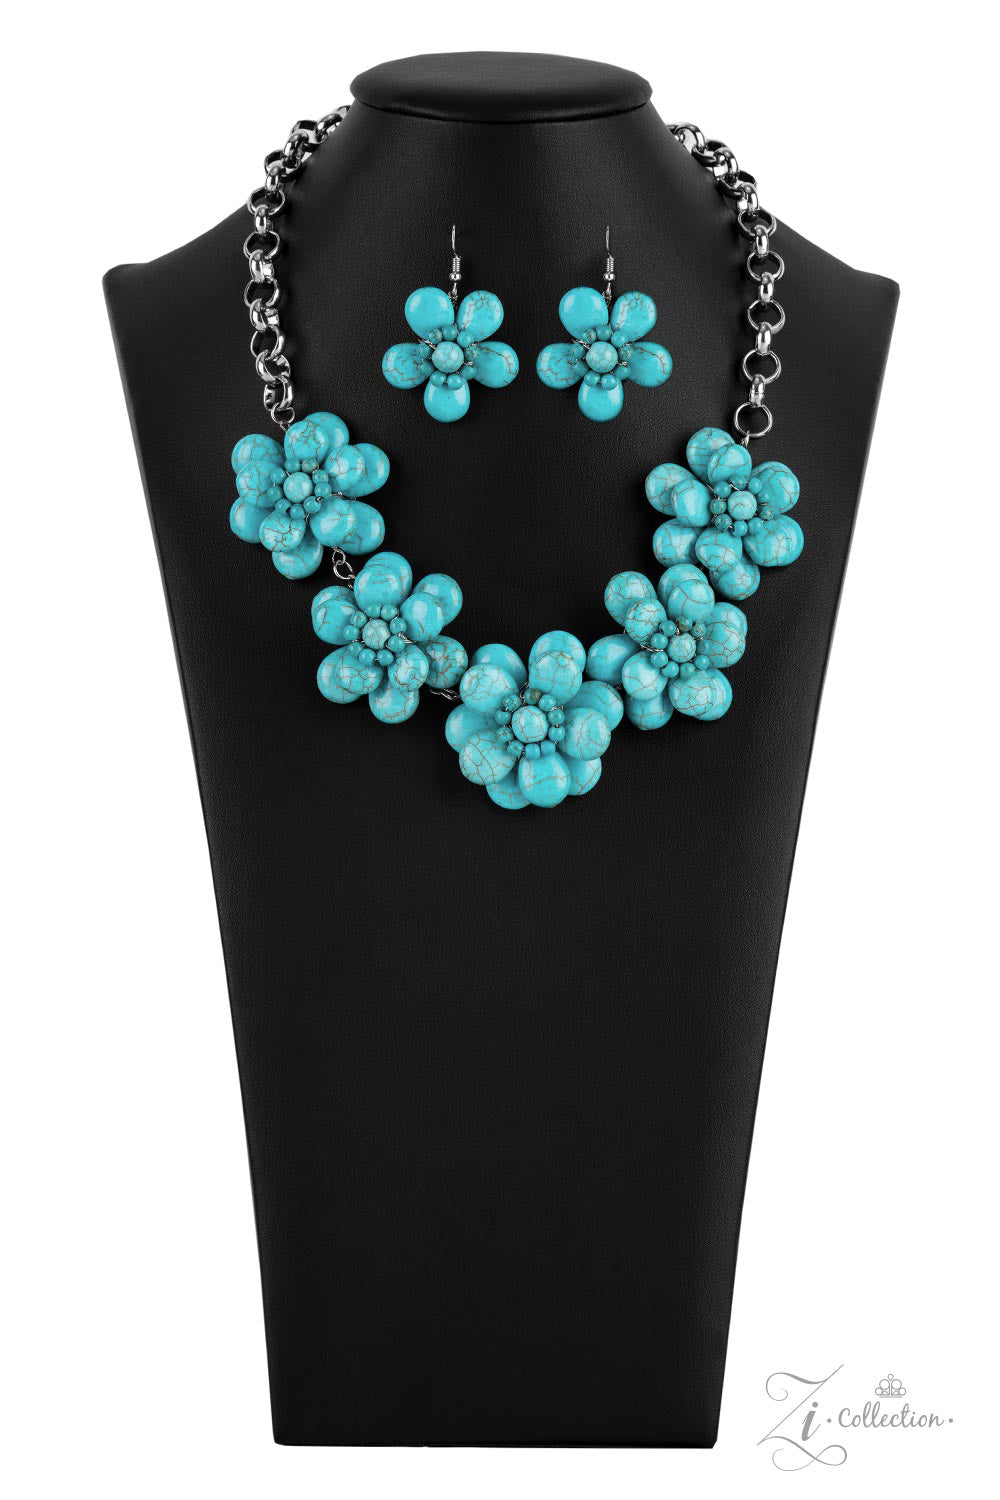 Genuine 2021 Zi Collection Necklace - Paparazzi Accessories  Dainty silver wire delicately wraps around earthy turquoise stone teardrop petals that beautifully layer into bountiful blossoms. Featuring turquoise stone beaded centers, the harmonious stone flowers gracefully connect to a substantial silver chain for an authentically artisan look below the collar. Features an adjustable clasp closure.  Sold as one individual necklace. Includes one pair of matching earrings.